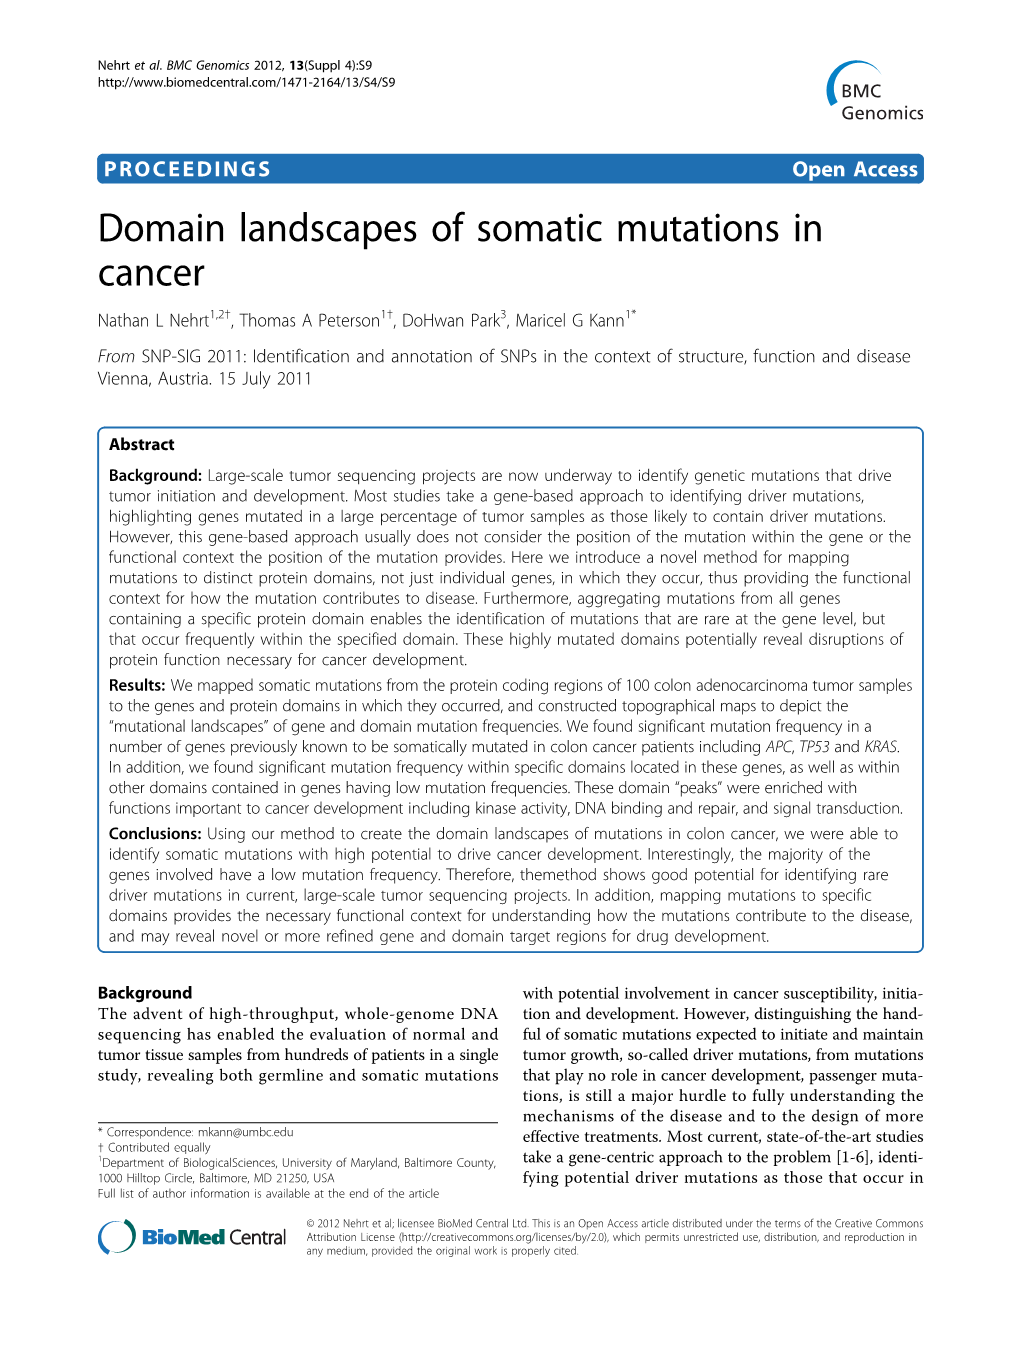 Domain Landscapes of Somatic Mutations in Cancer